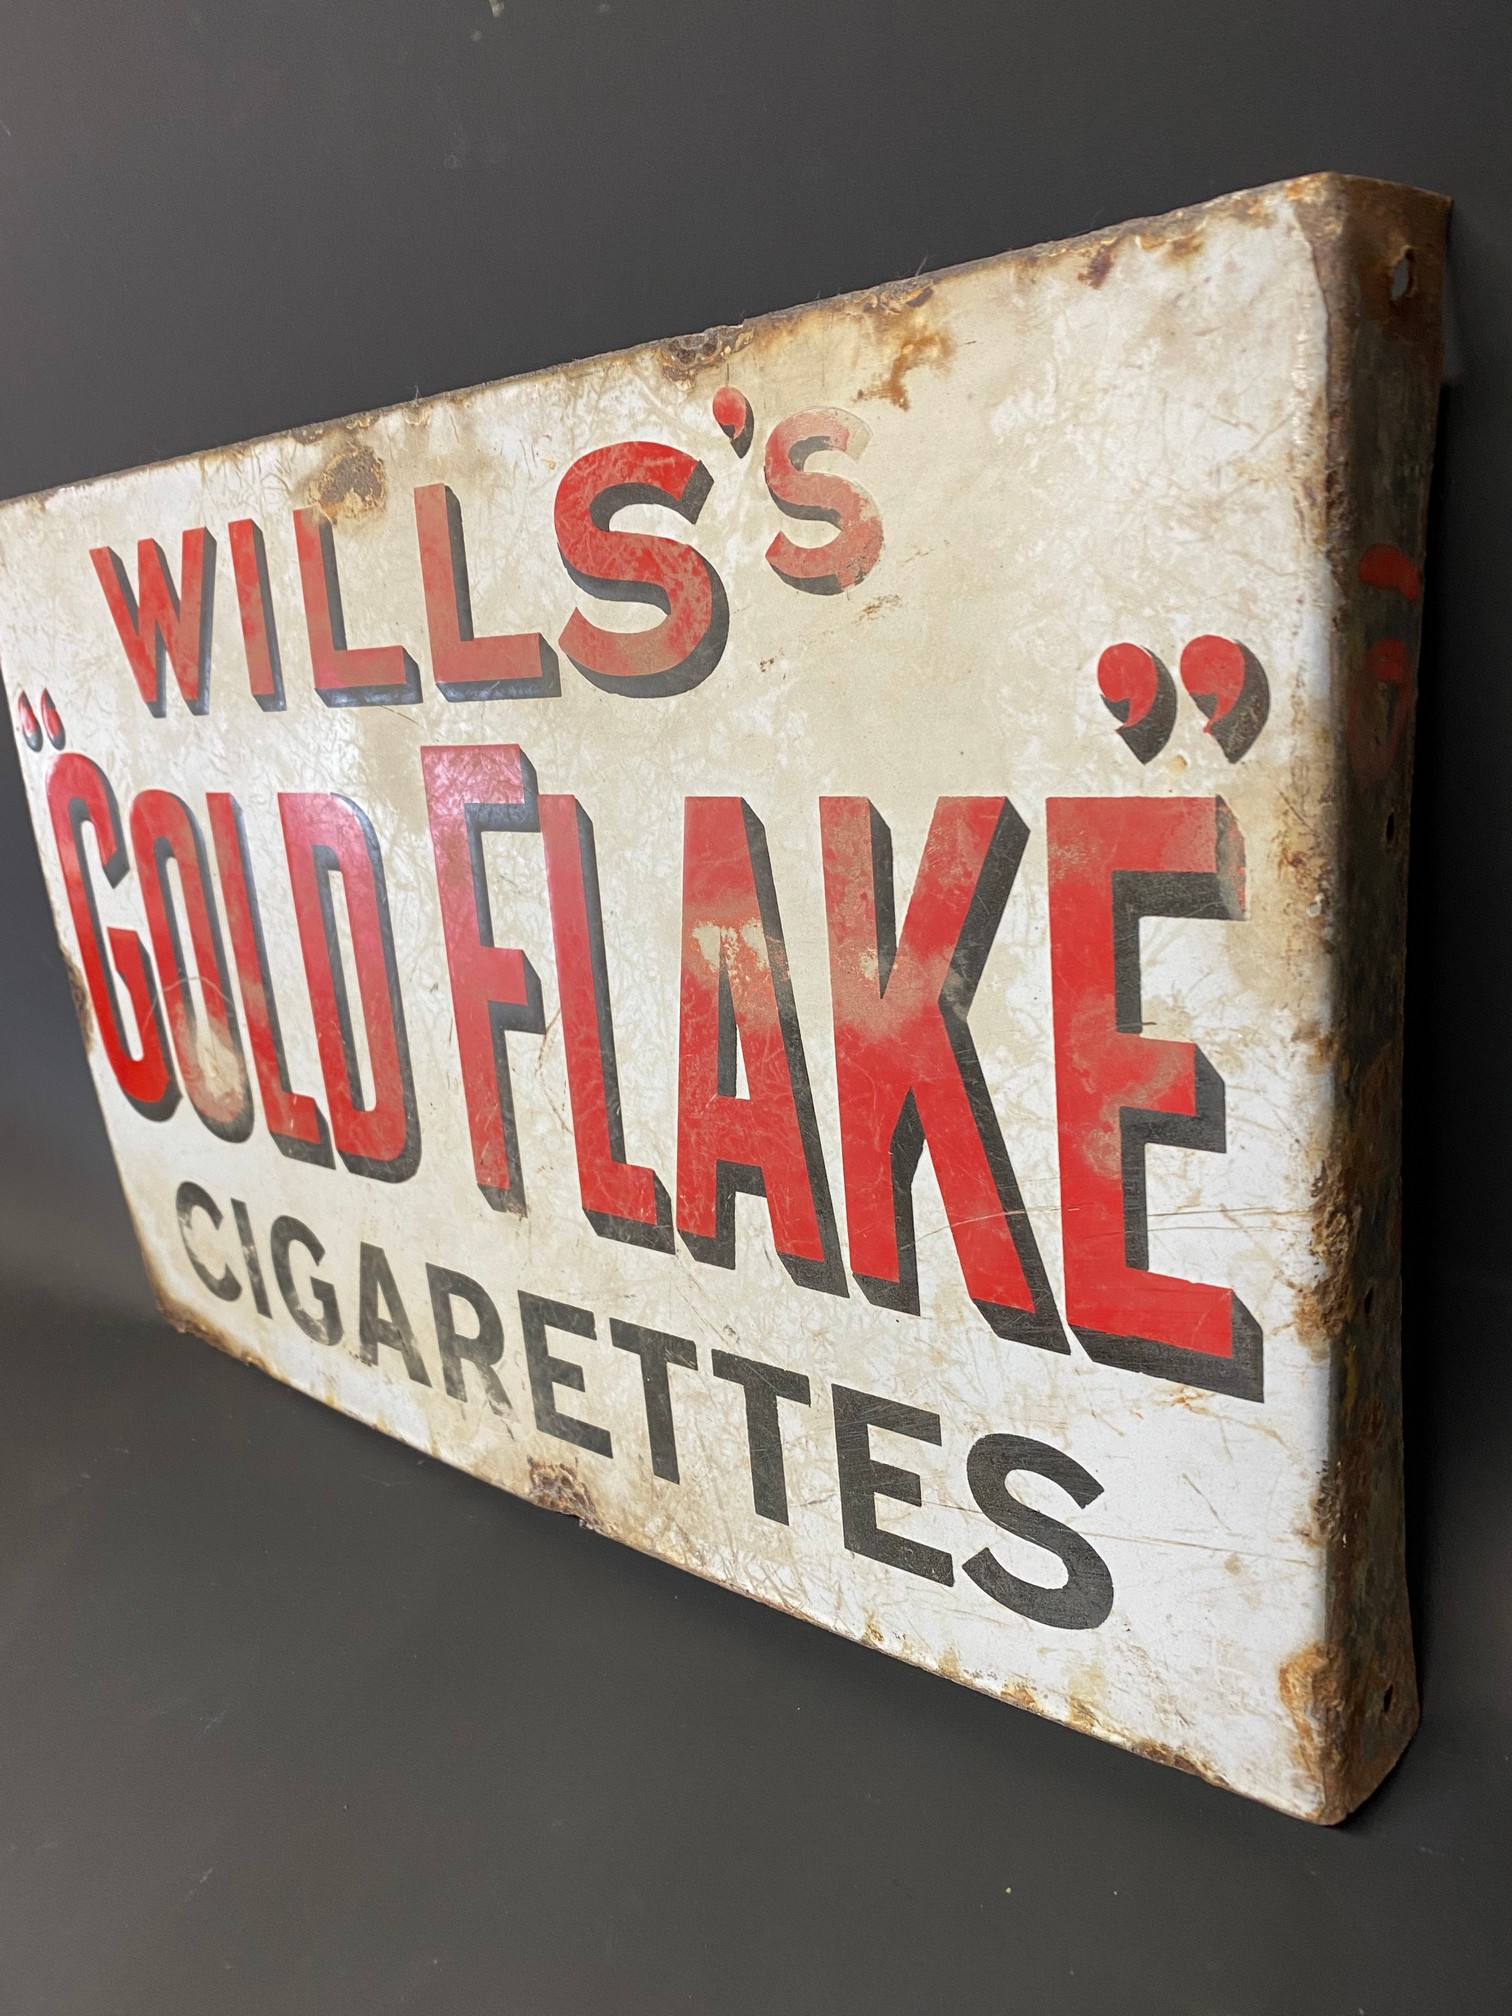 A Wills's Gold Flake Cigarettes double sided enamel sign with hanging flange, 18 x 12". - Image 3 of 3